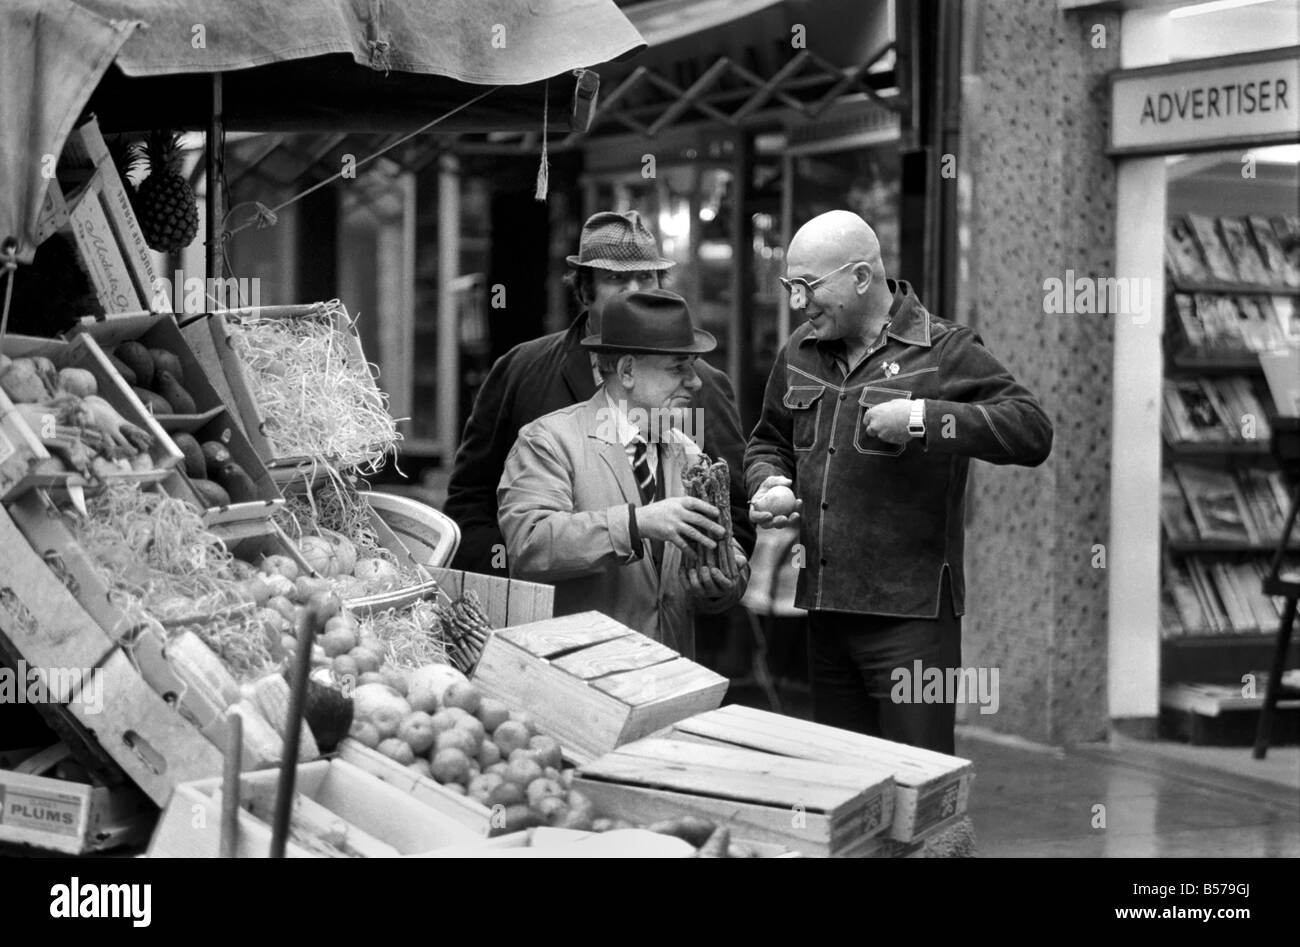 Actor: Telly Savalas (Kojack the Brooklyn cop on T.V.) is in London for a few days to film scenes in a Warner Brothers film called 'Inside Out'. February 1975 75-00927-002 Stock Photo